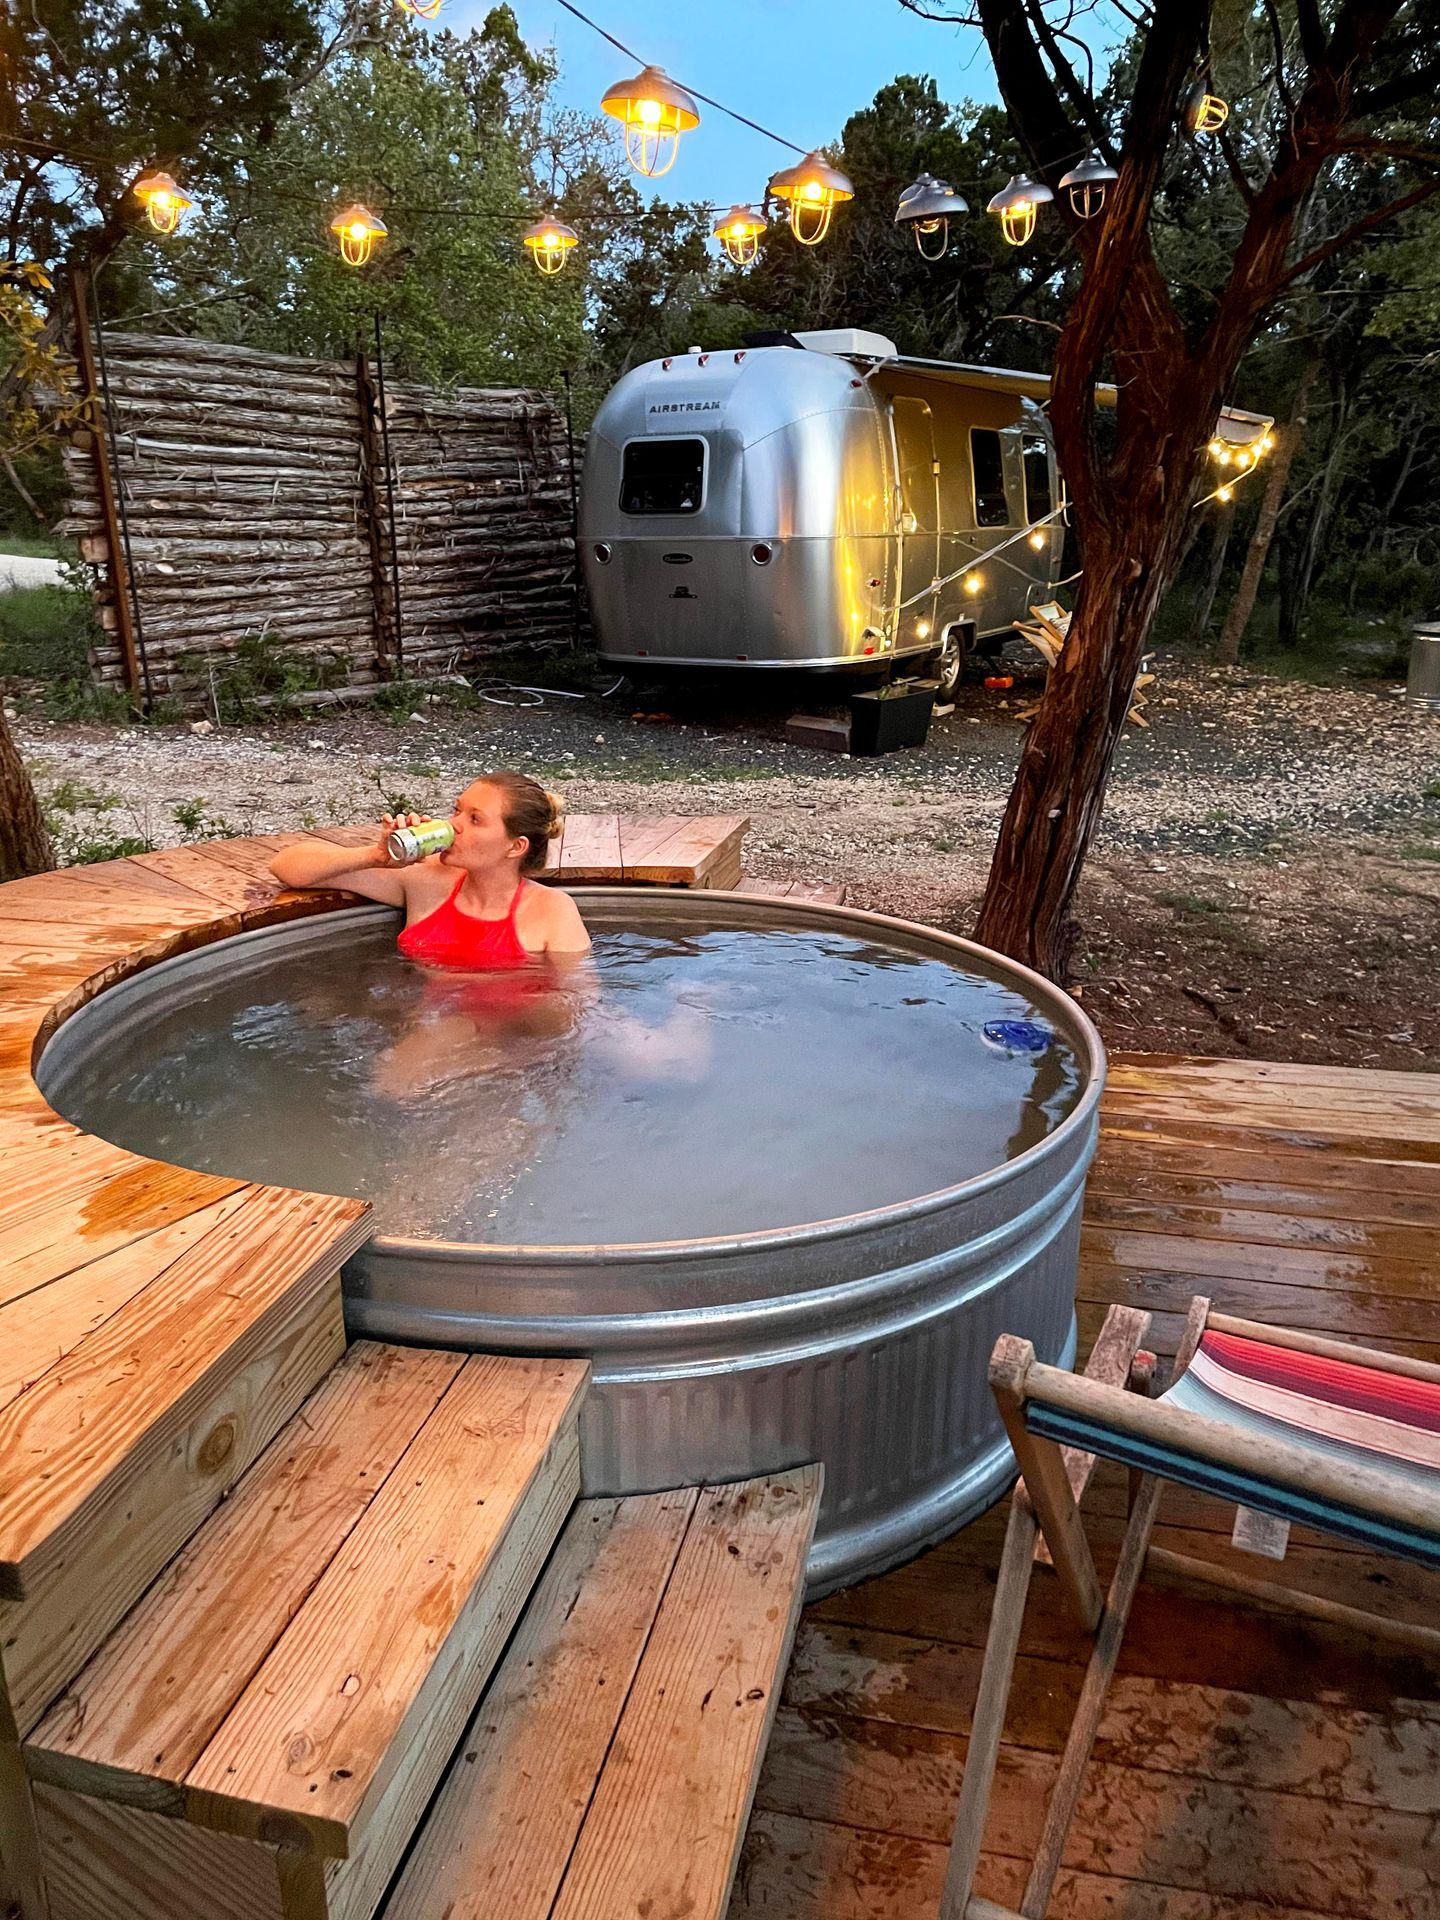 Lydia sits in a hot tub drinking a beer with an airstream in the background. There are hanging lights up above.